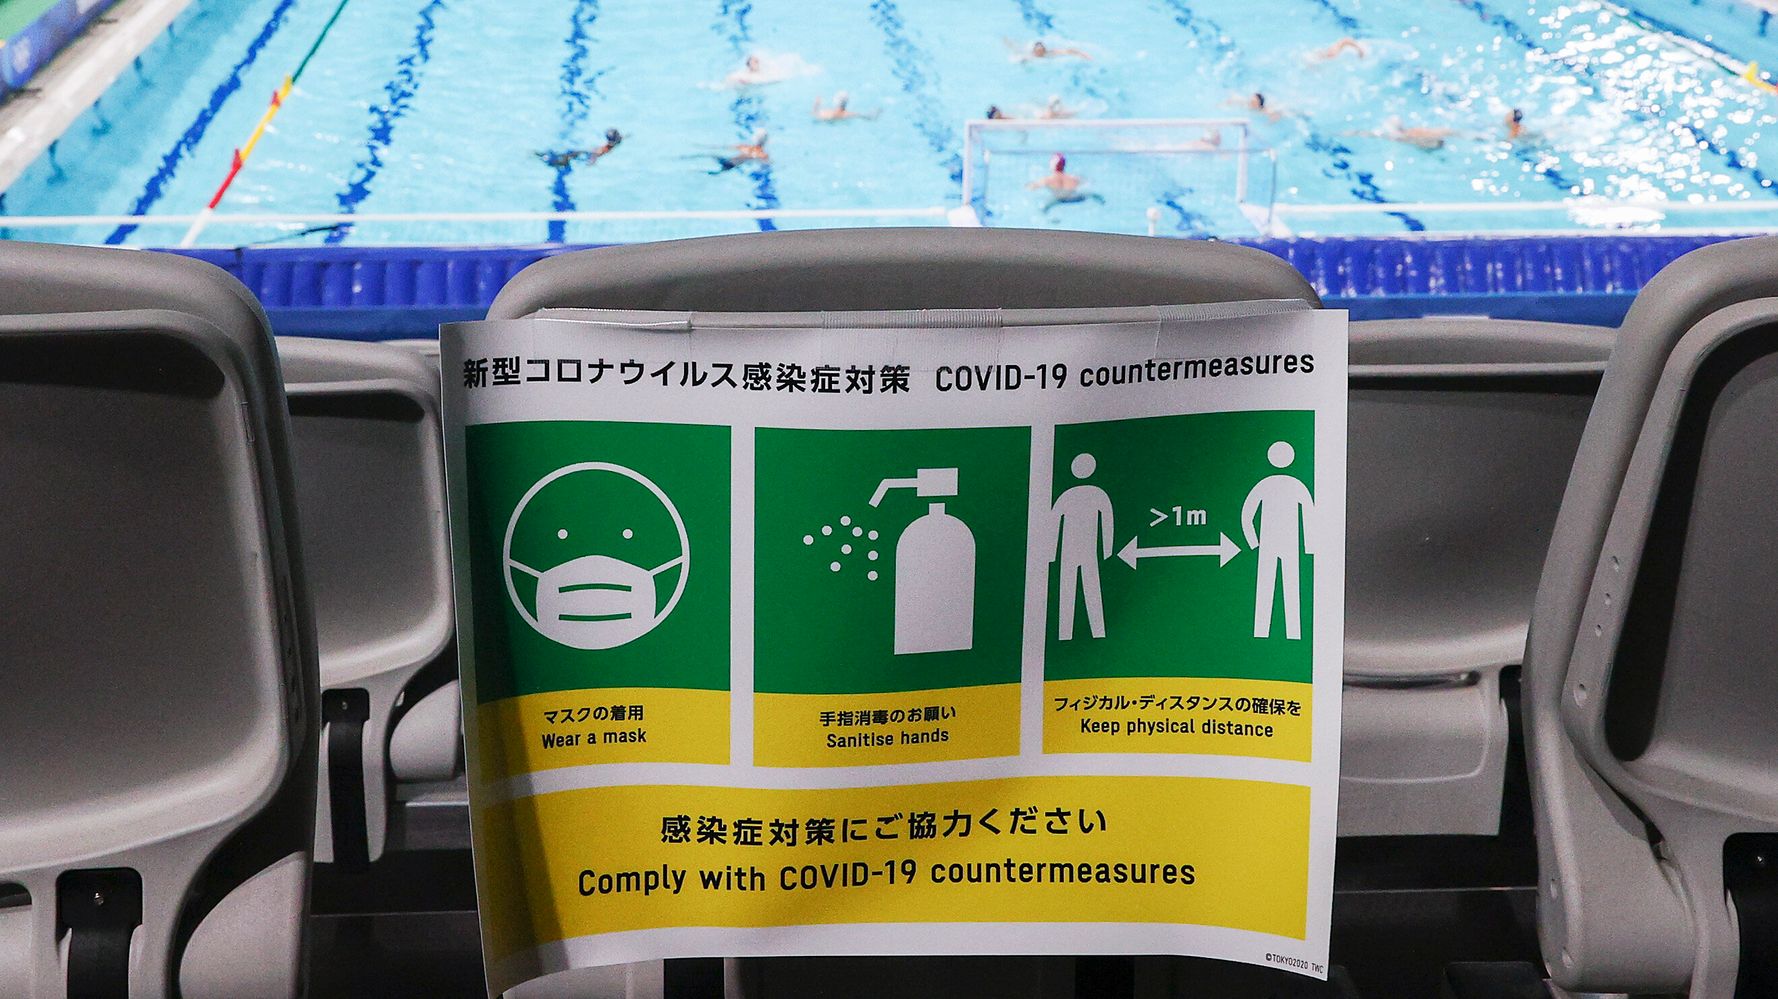 Tokyo Records Highest Number Of Daily COVID-19 Cases Amid Olympics